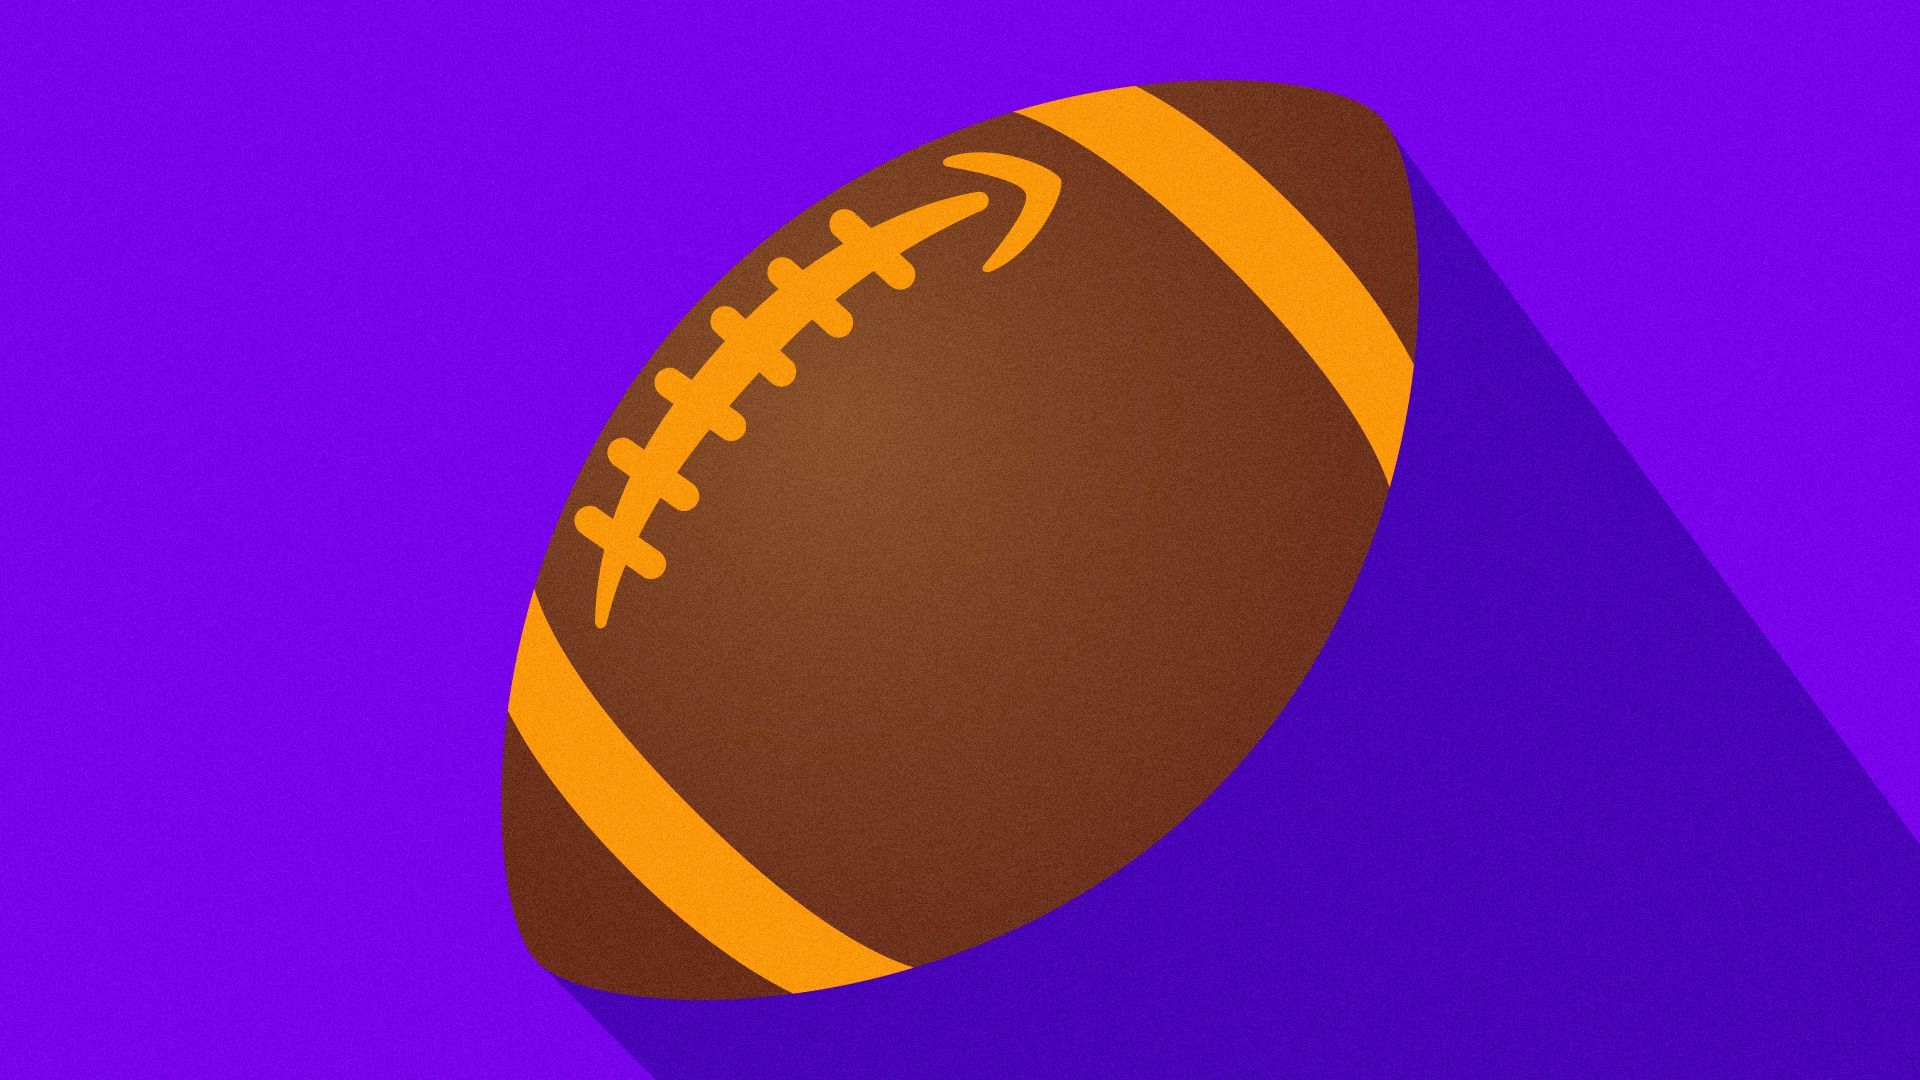 Illustration of a football with Amazon’s logo as stitching